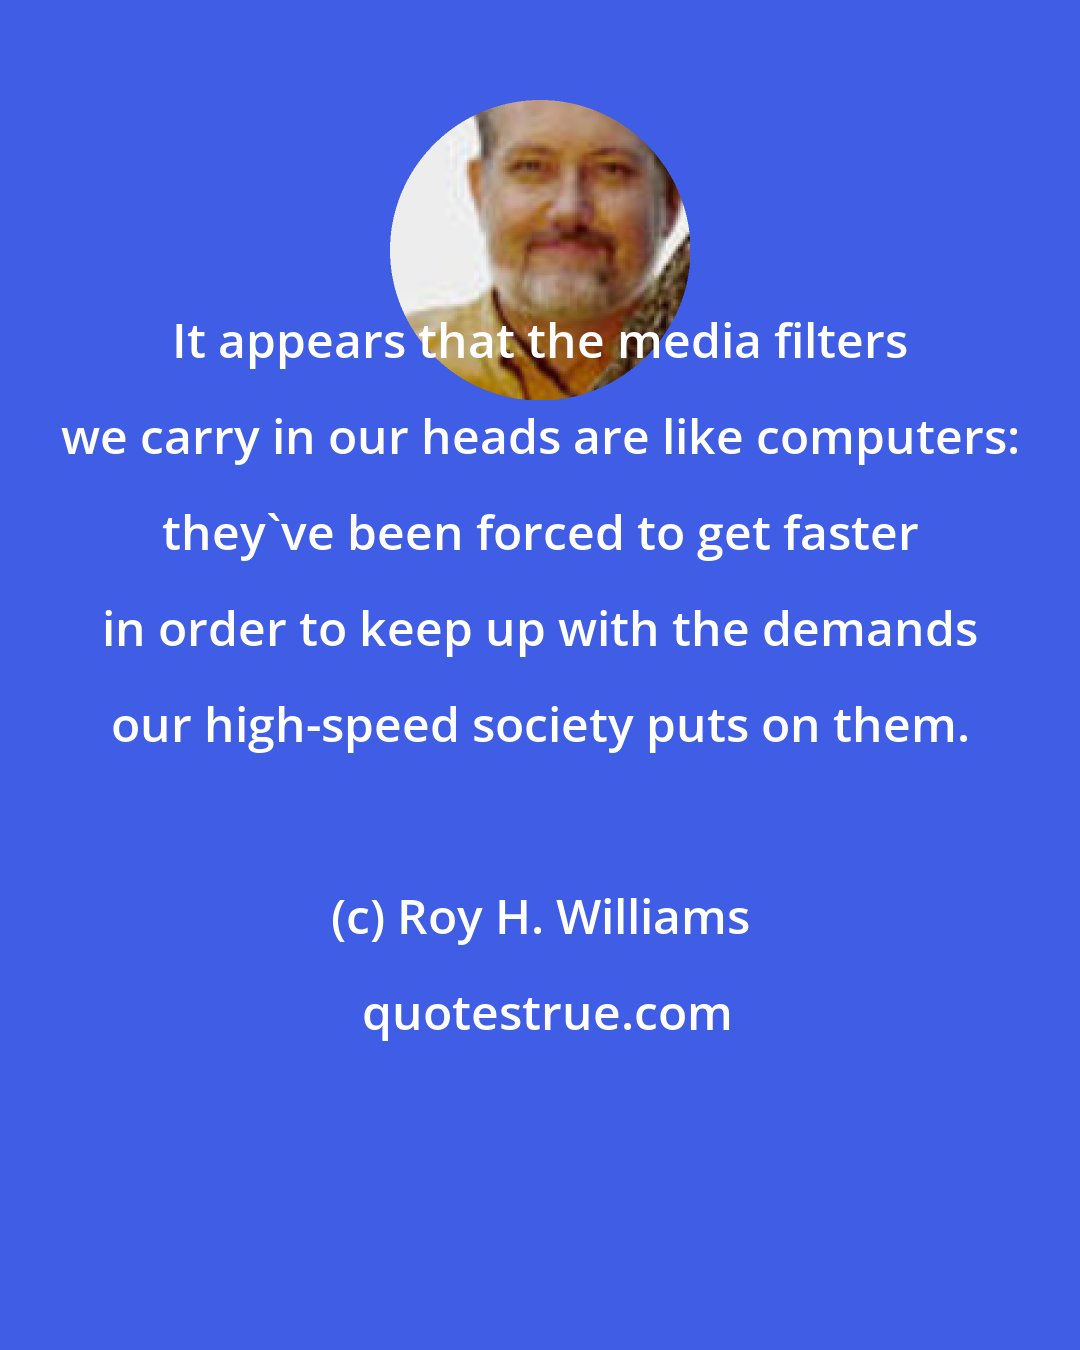 Roy H. Williams: It appears that the media filters we carry in our heads are like computers: they've been forced to get faster in order to keep up with the demands our high-speed society puts on them.